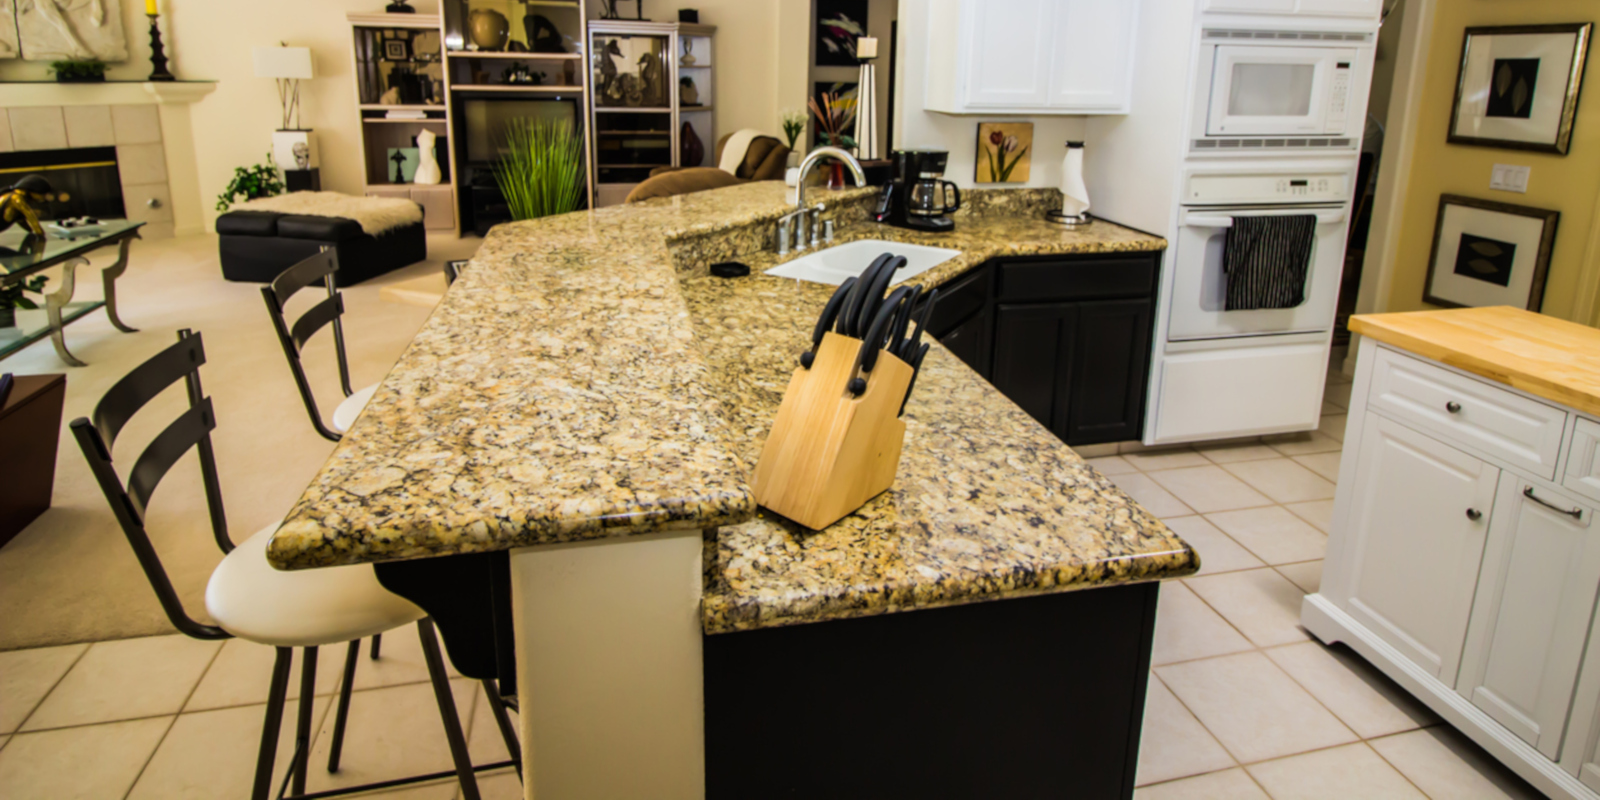 Granite countertops can be a stunning focal point in your kitchen or bathroom